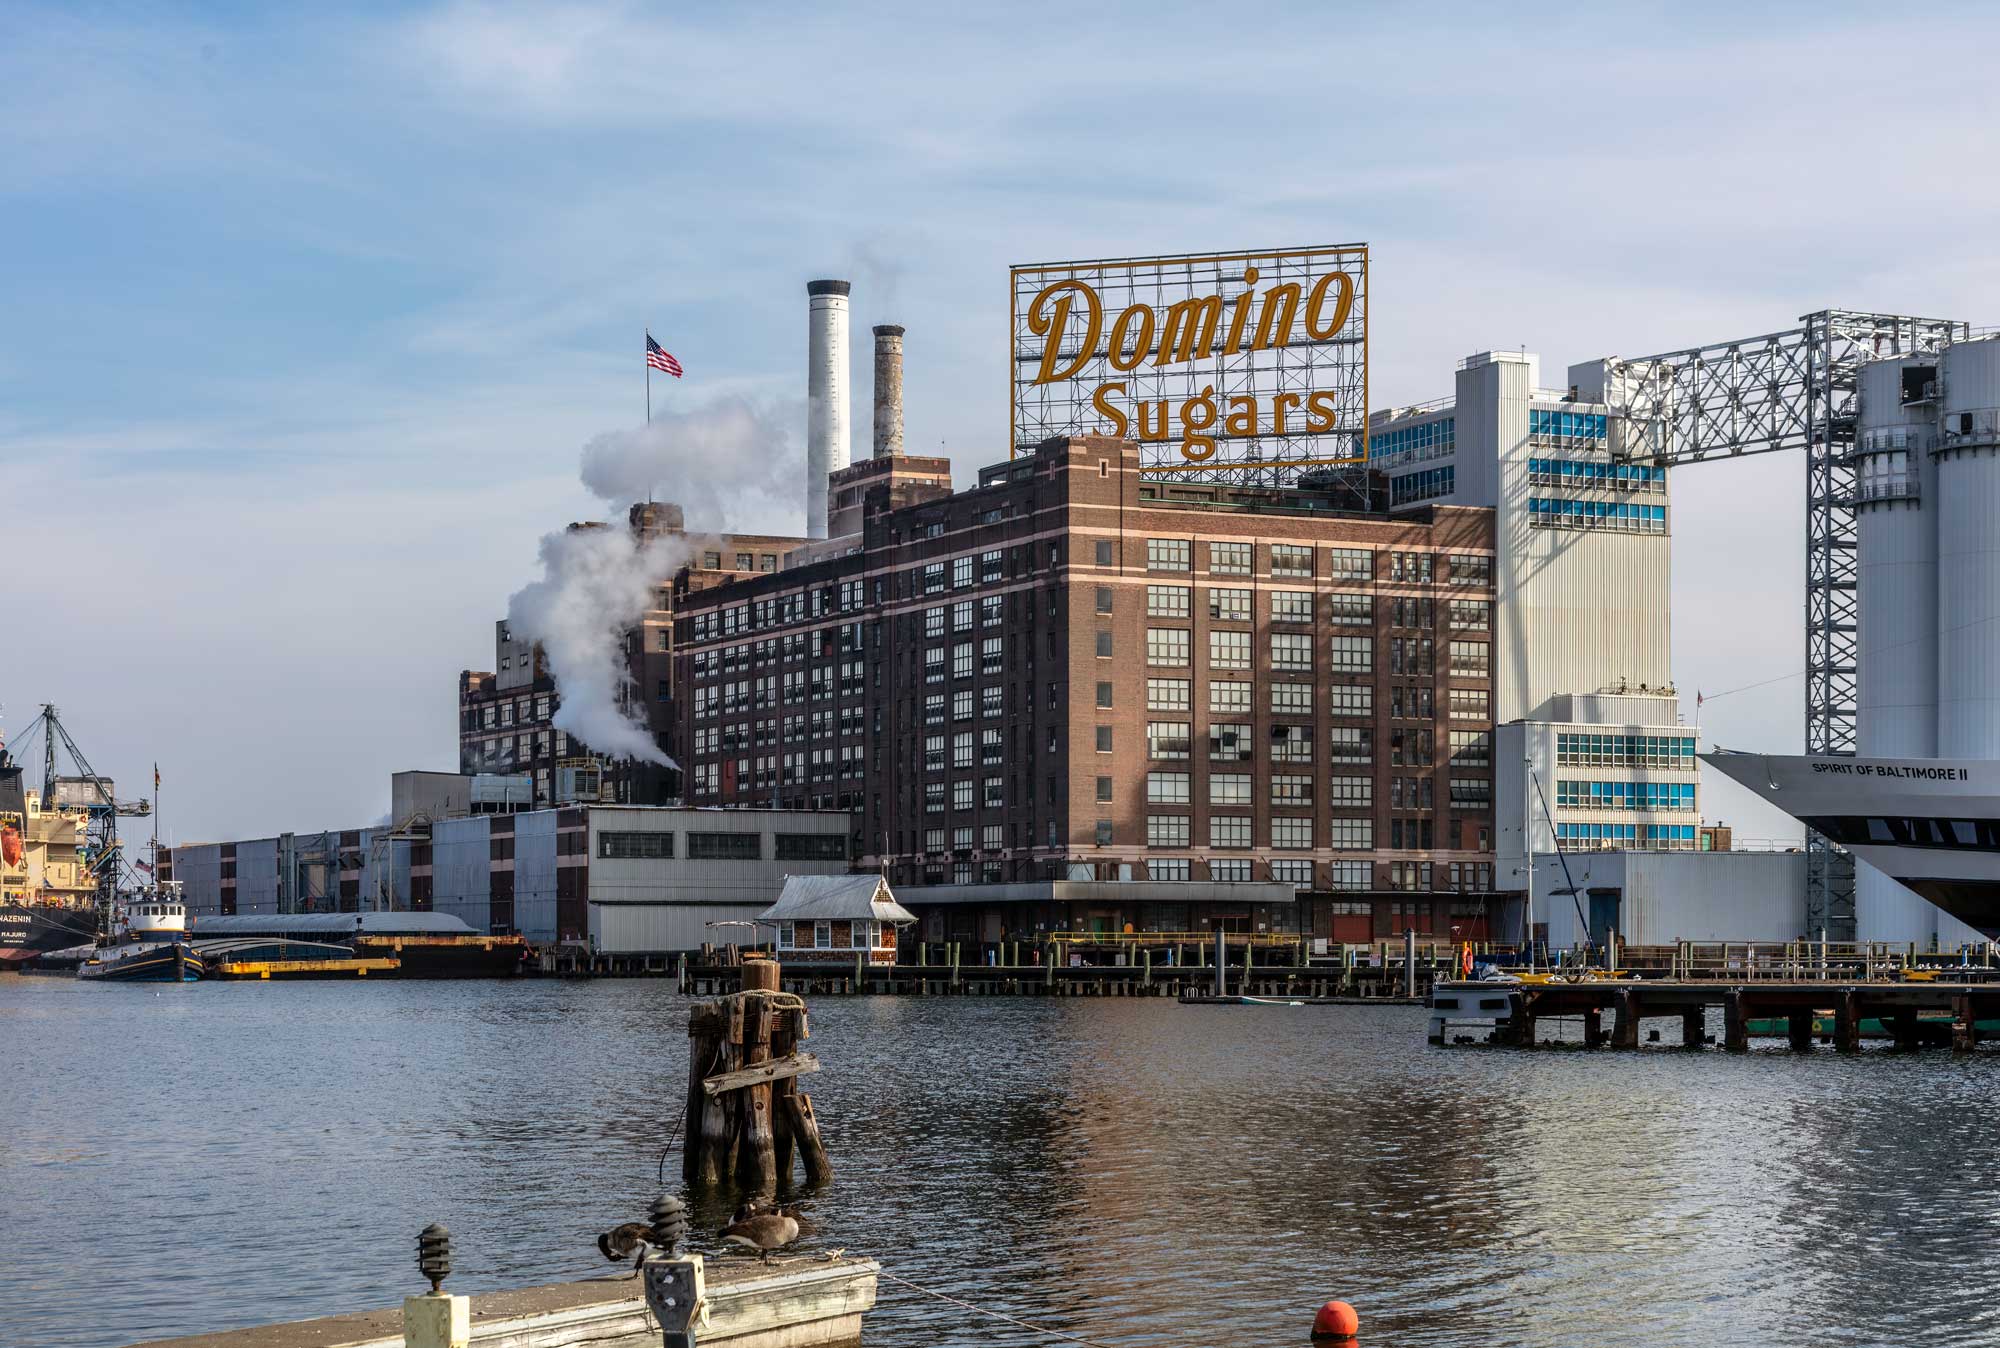 Photograph of the Domino Sugar Refinery in Baltimore, Maryland, U.S.A. The photo shows a brick building with may windows. A large sign that says "Domino Sugars" is on the roof of the building, and white smoke or steam is emerging from the side. Two smokestacks can be seen in the background. The building is sitting at the edge of a body of water.